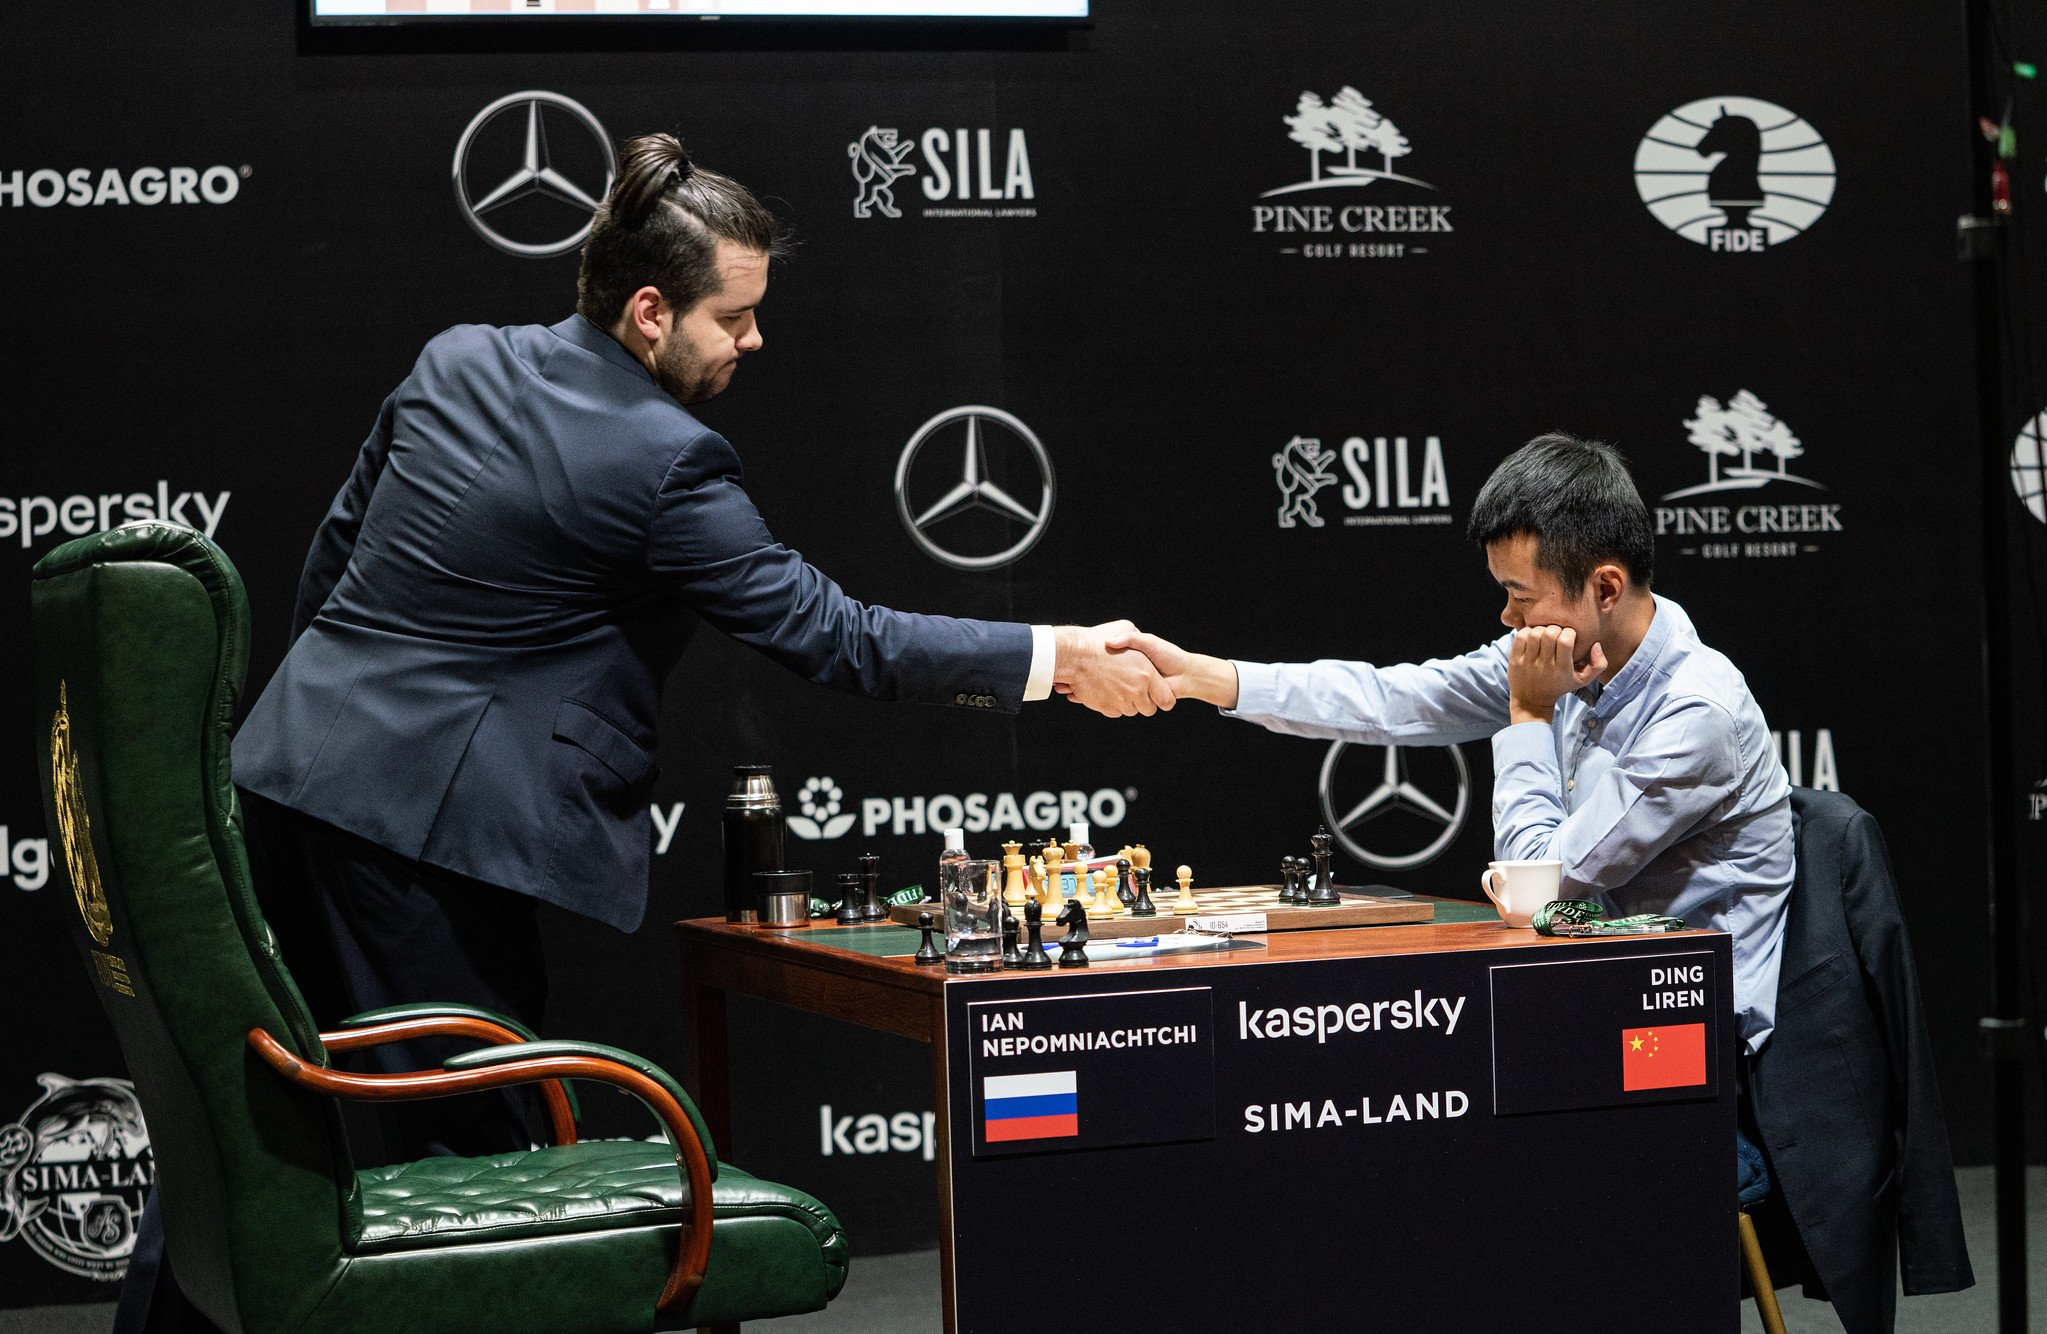 Nepomniachtchi earns one-point lead at FIDE Candidates Tournament